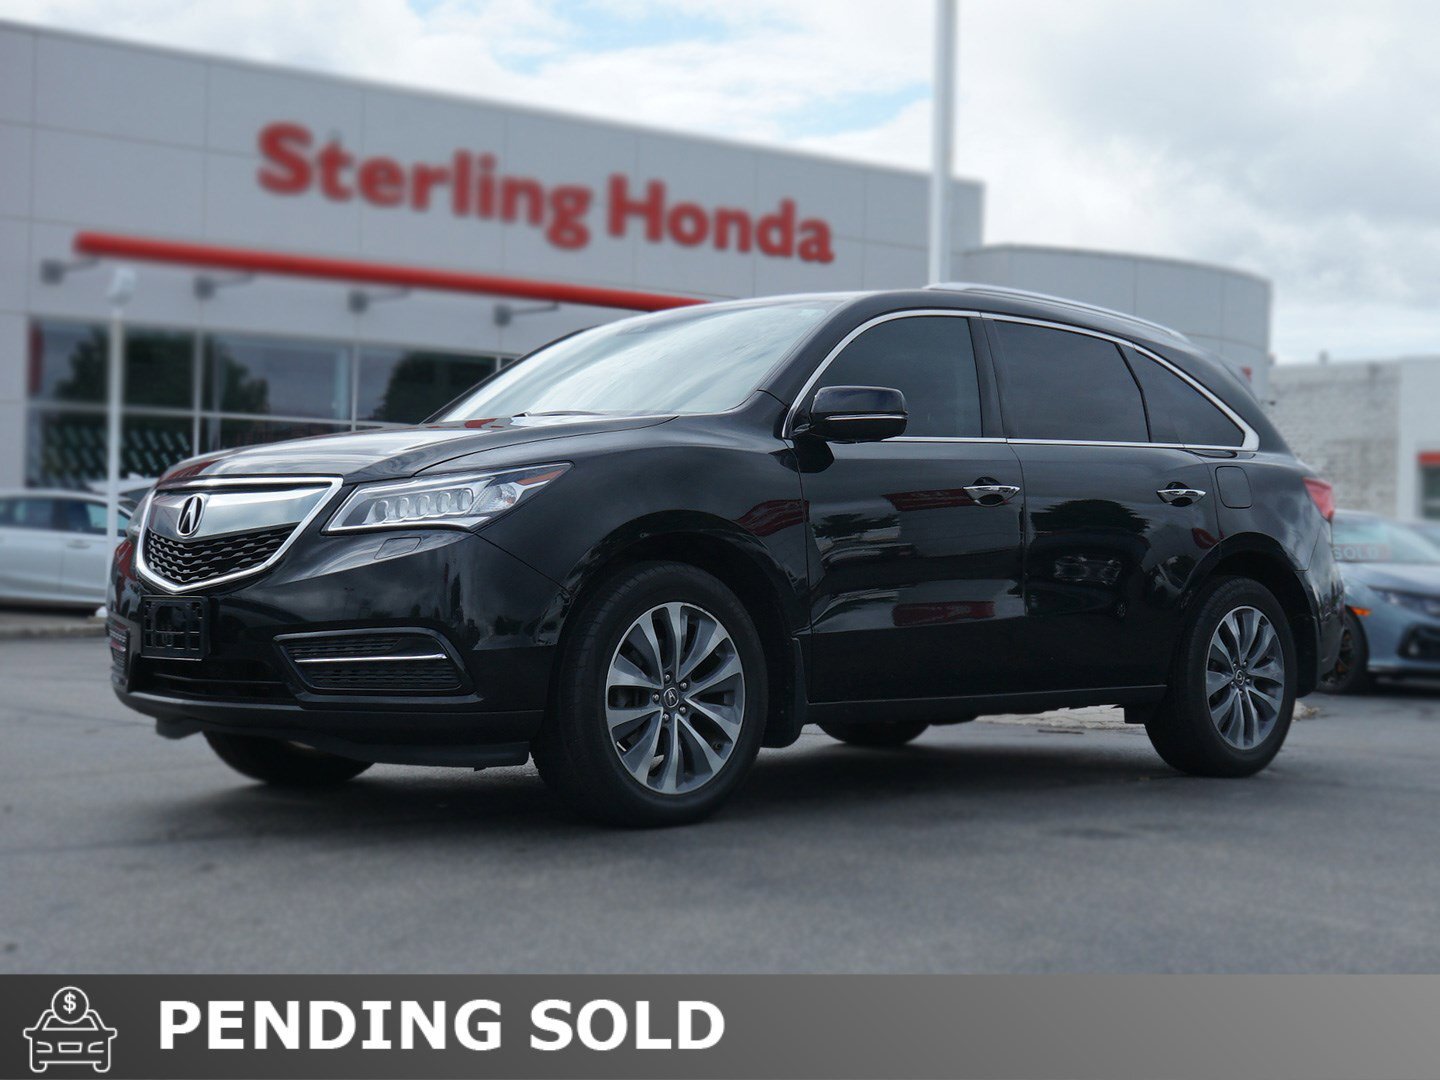 2016 Acura MDX NAVIGATION PACKAGE | NO ACCIDENTS